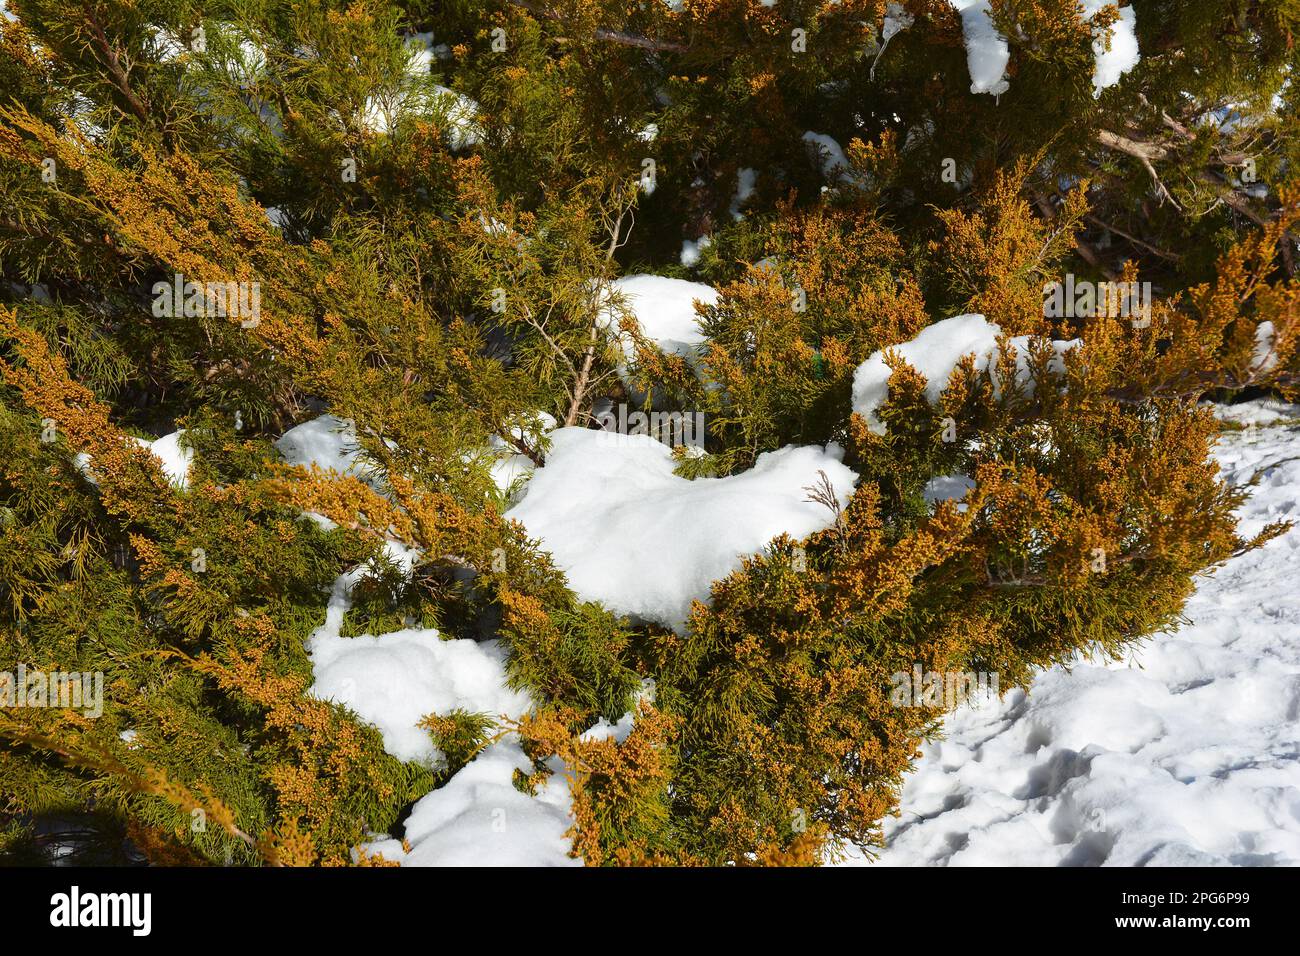 Juniperus virginiana tree with male cones covered snow. Stock Photo